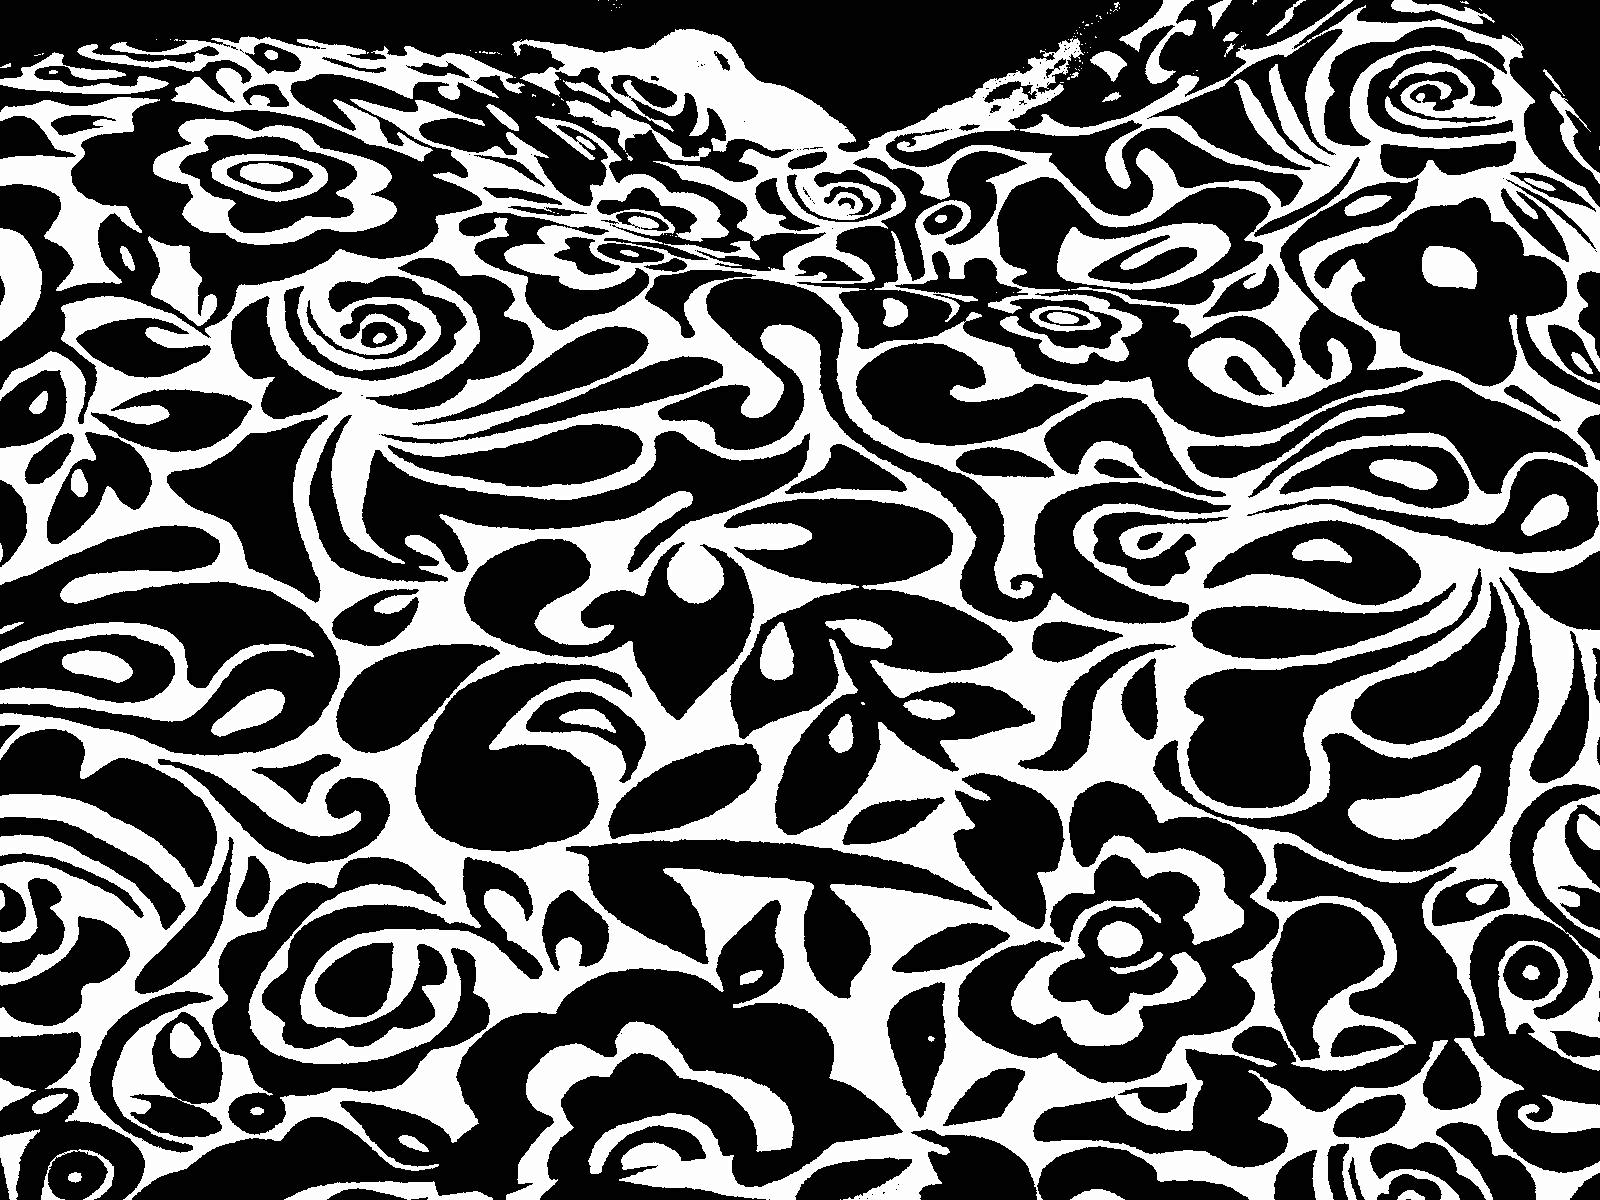 Floral Patterns Black and White